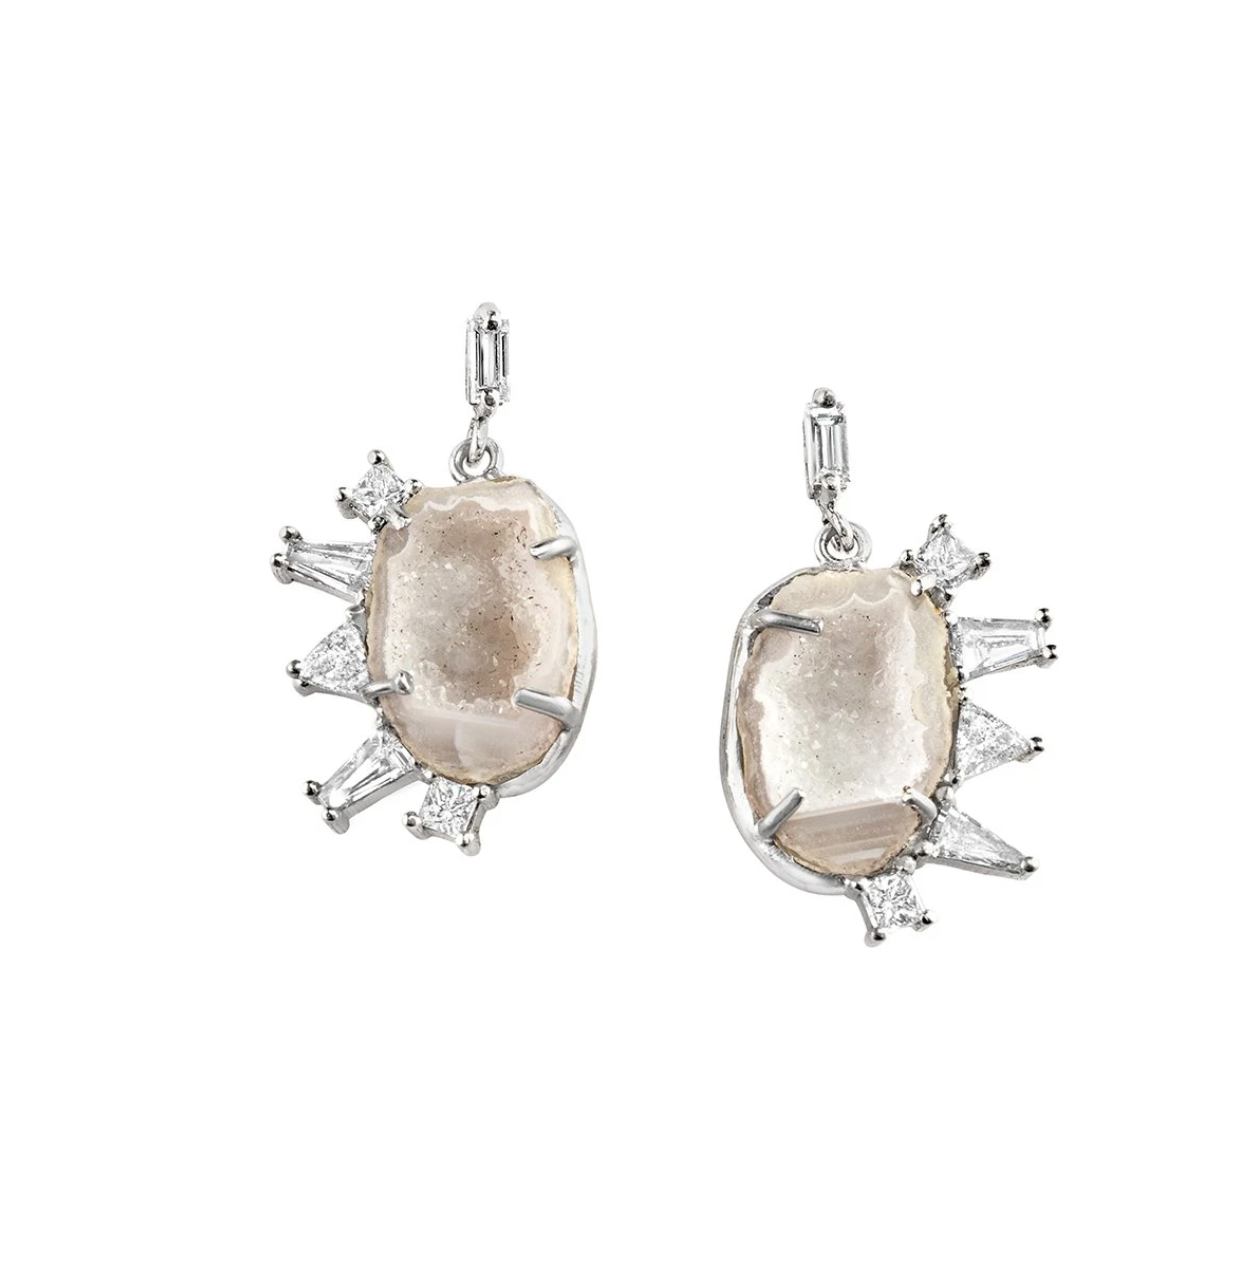 Diamond Edged Geode Earrings by Meredith Young